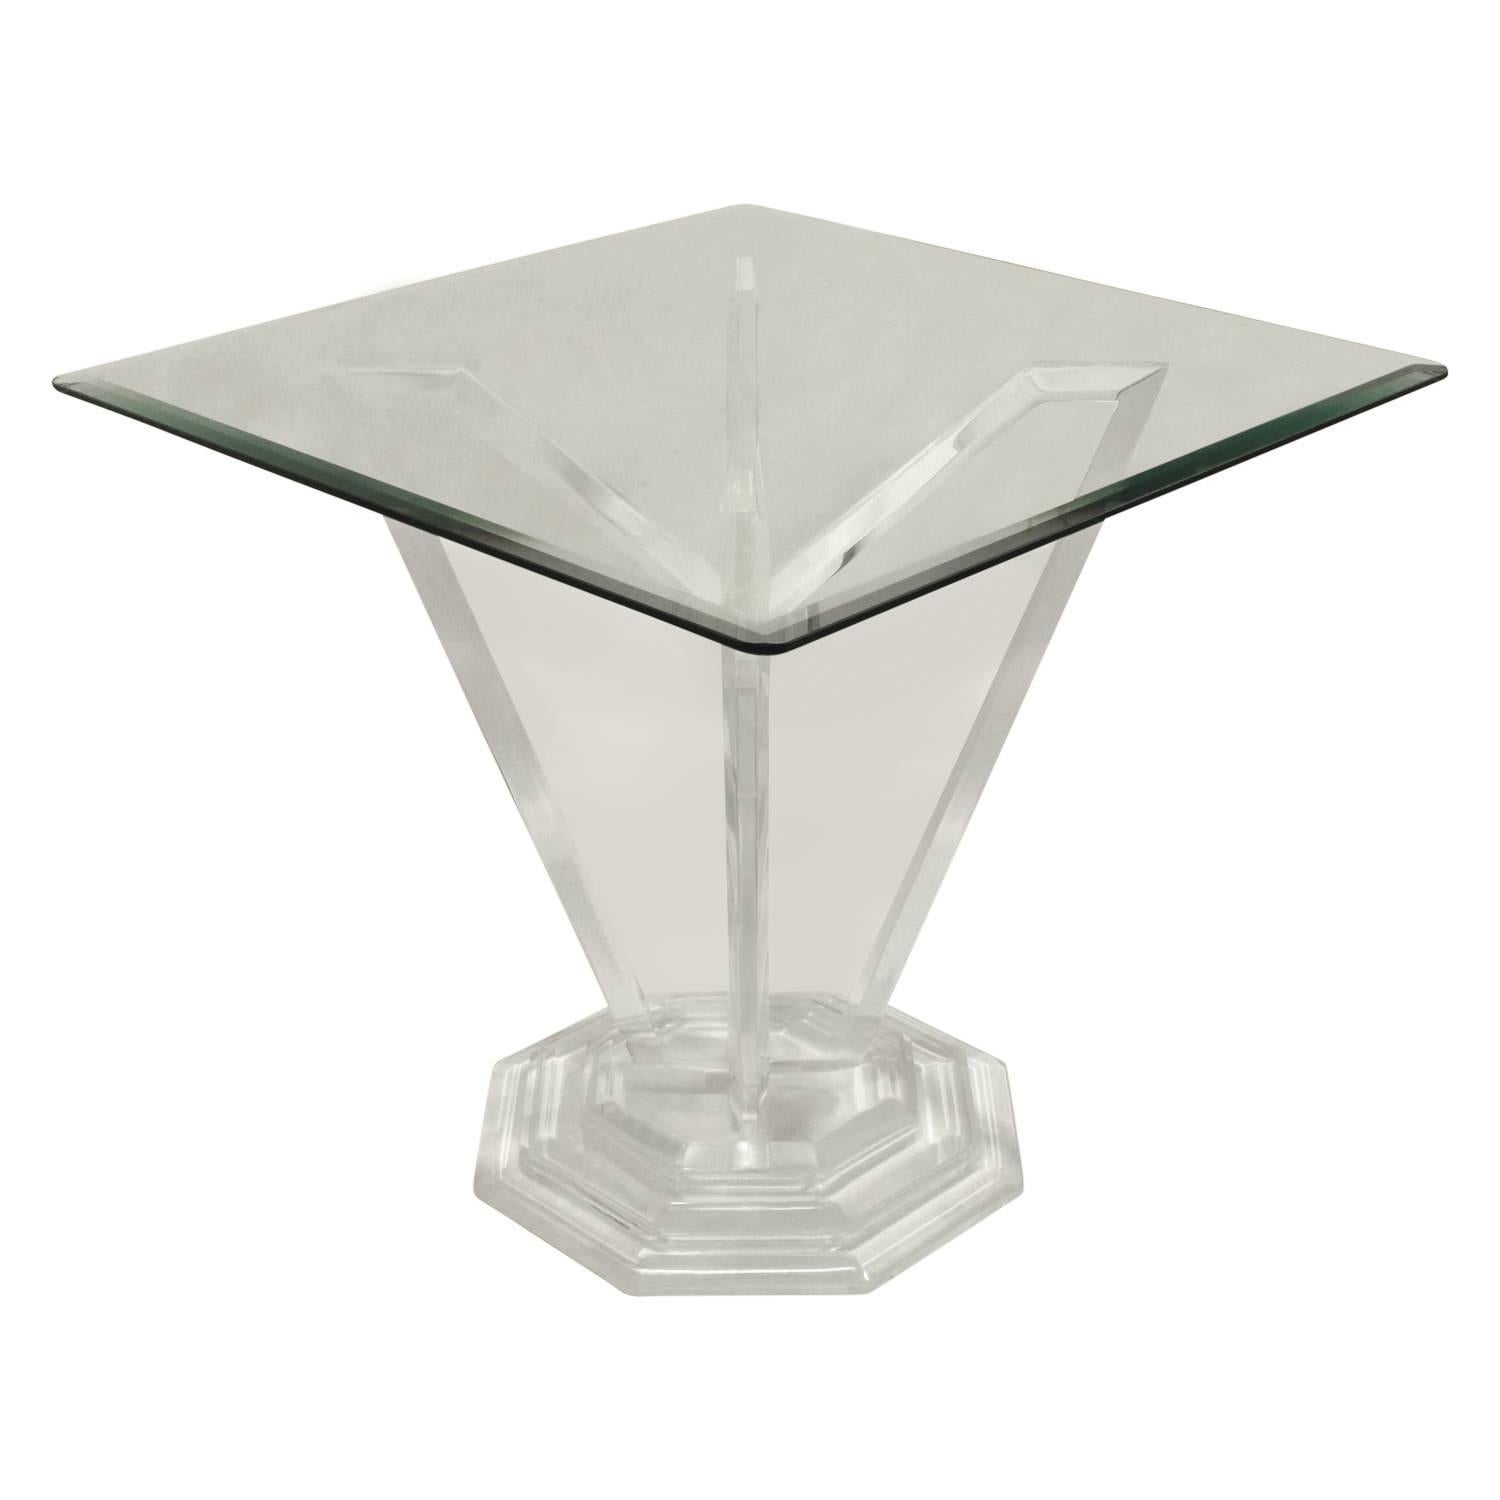 American Sculptural Lucite Side Table with Stepped Base, 1970s